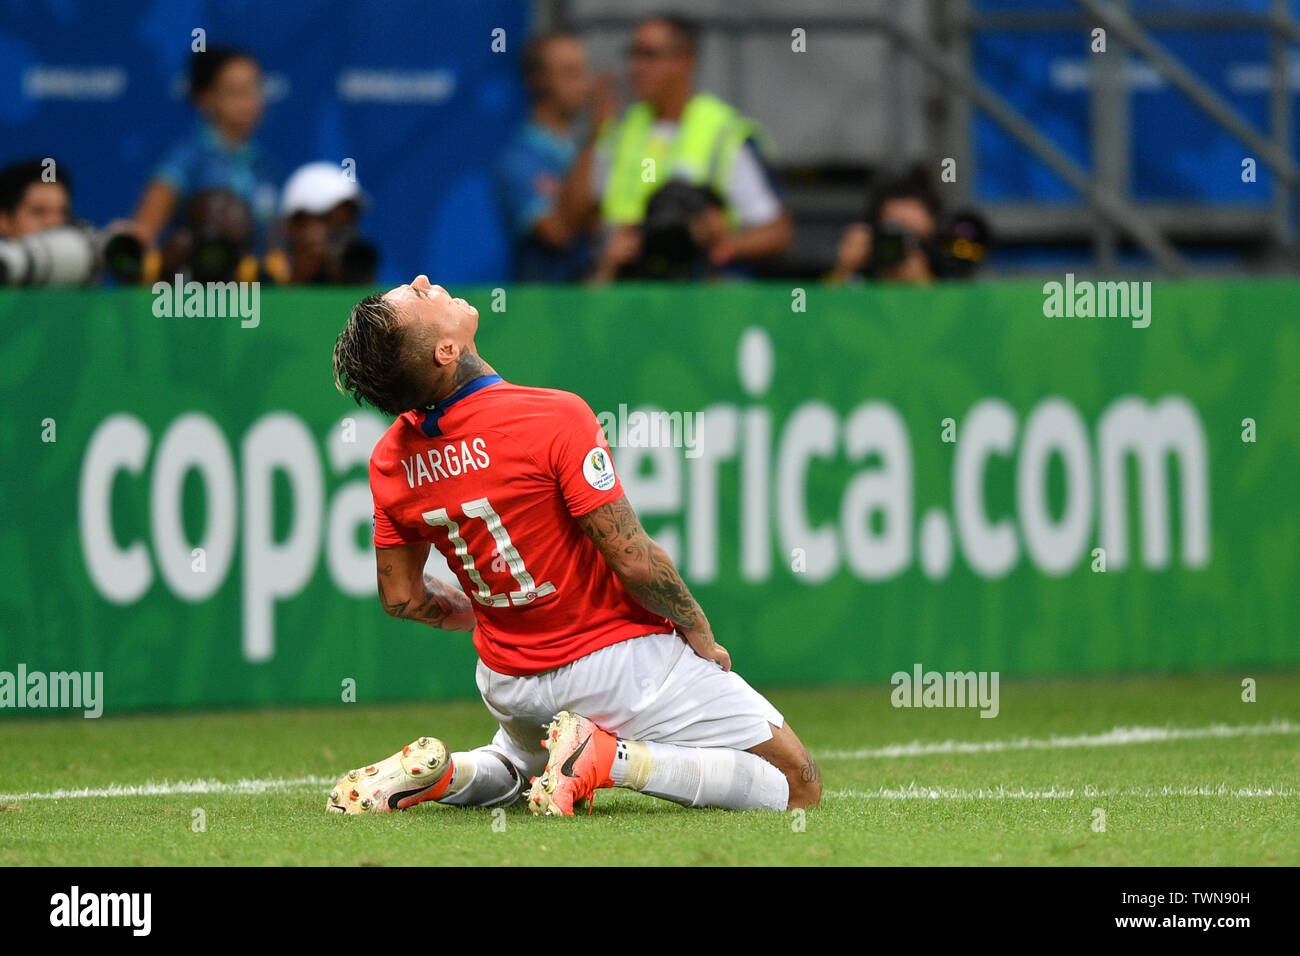 Salvador, Brazil. 21st June, 2019. Chile's Eduardo Vargas reacts during the Group C match between Chile and Ecuador at the Copa America 2019, held in Salvador, Brazil, June 21, 2019. Credit: Xin Yuewei/Xinhua/Alamy Live News Stock Photo